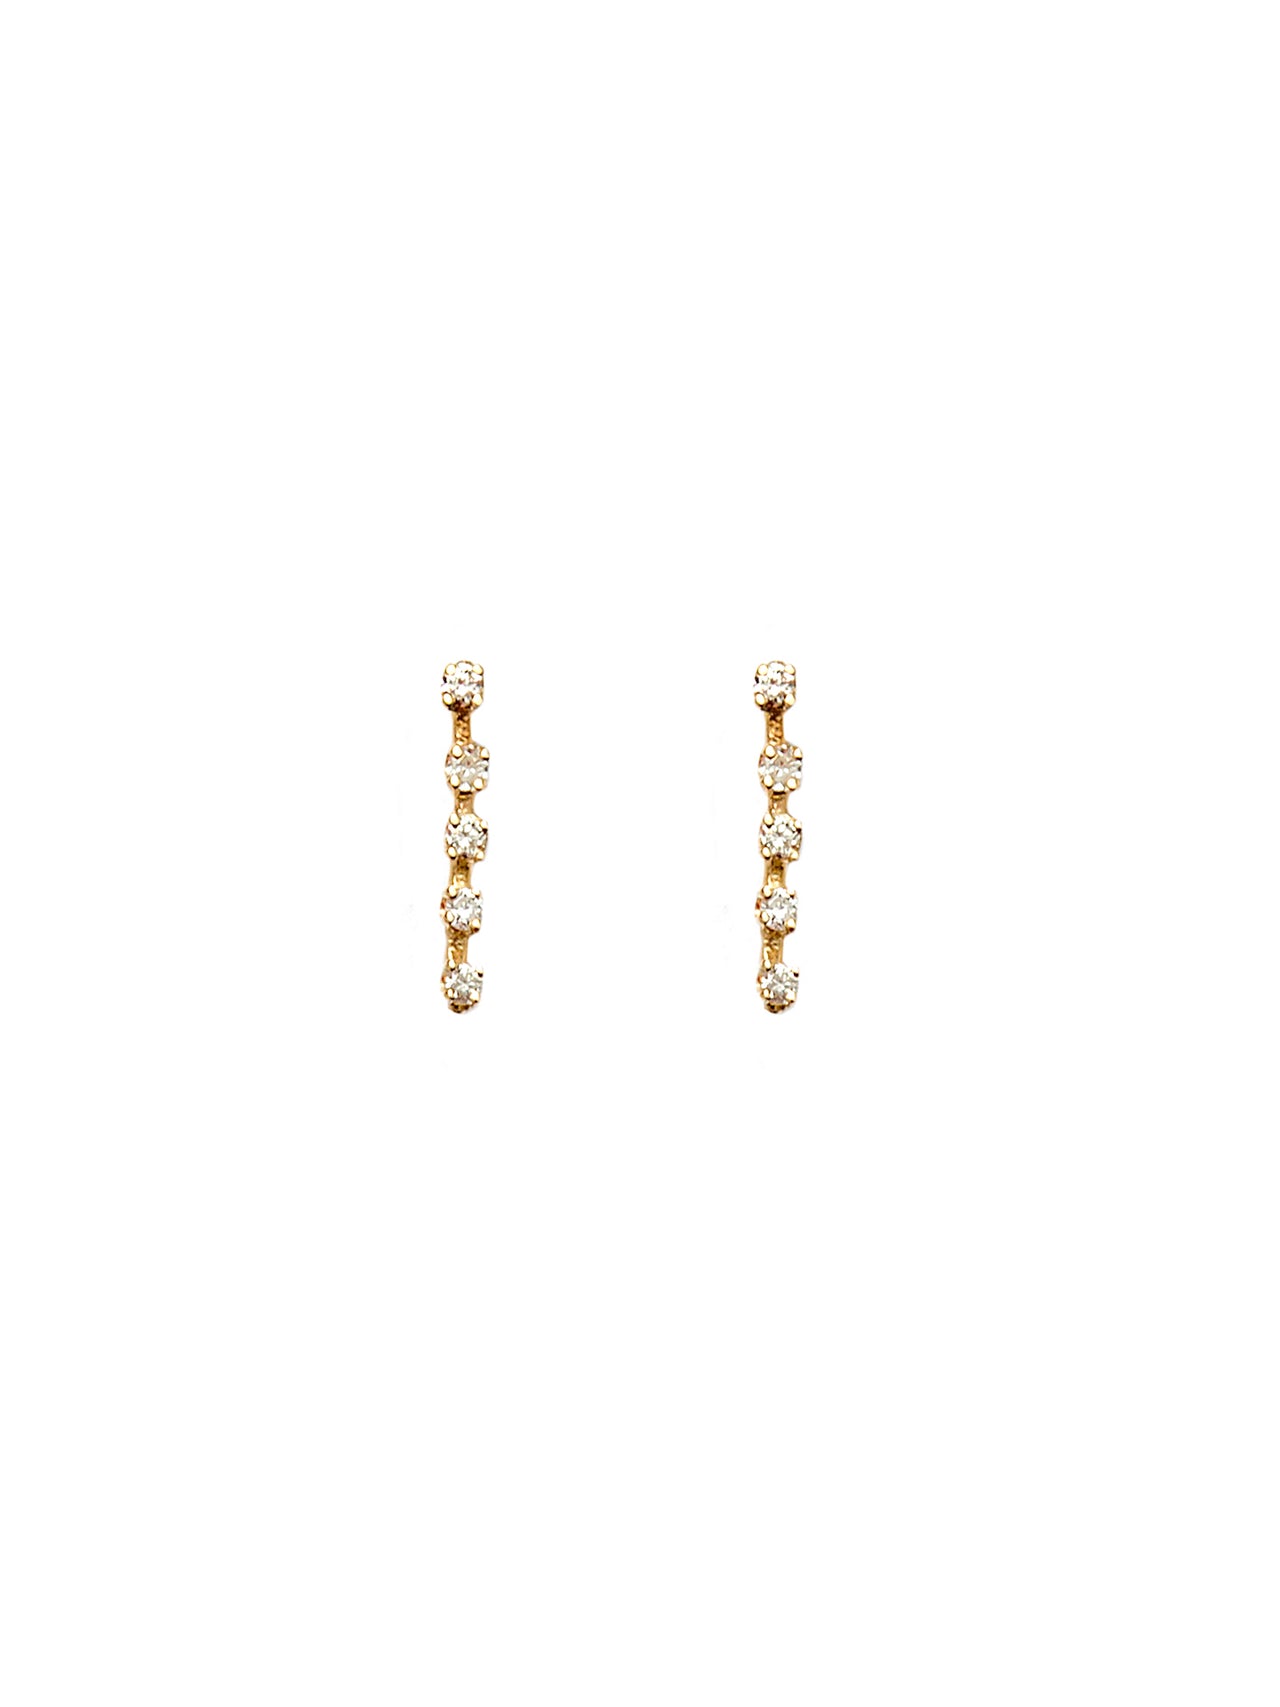 14Kt Yellow Gold Five Diamond Stud Earring pictured on light grey background.